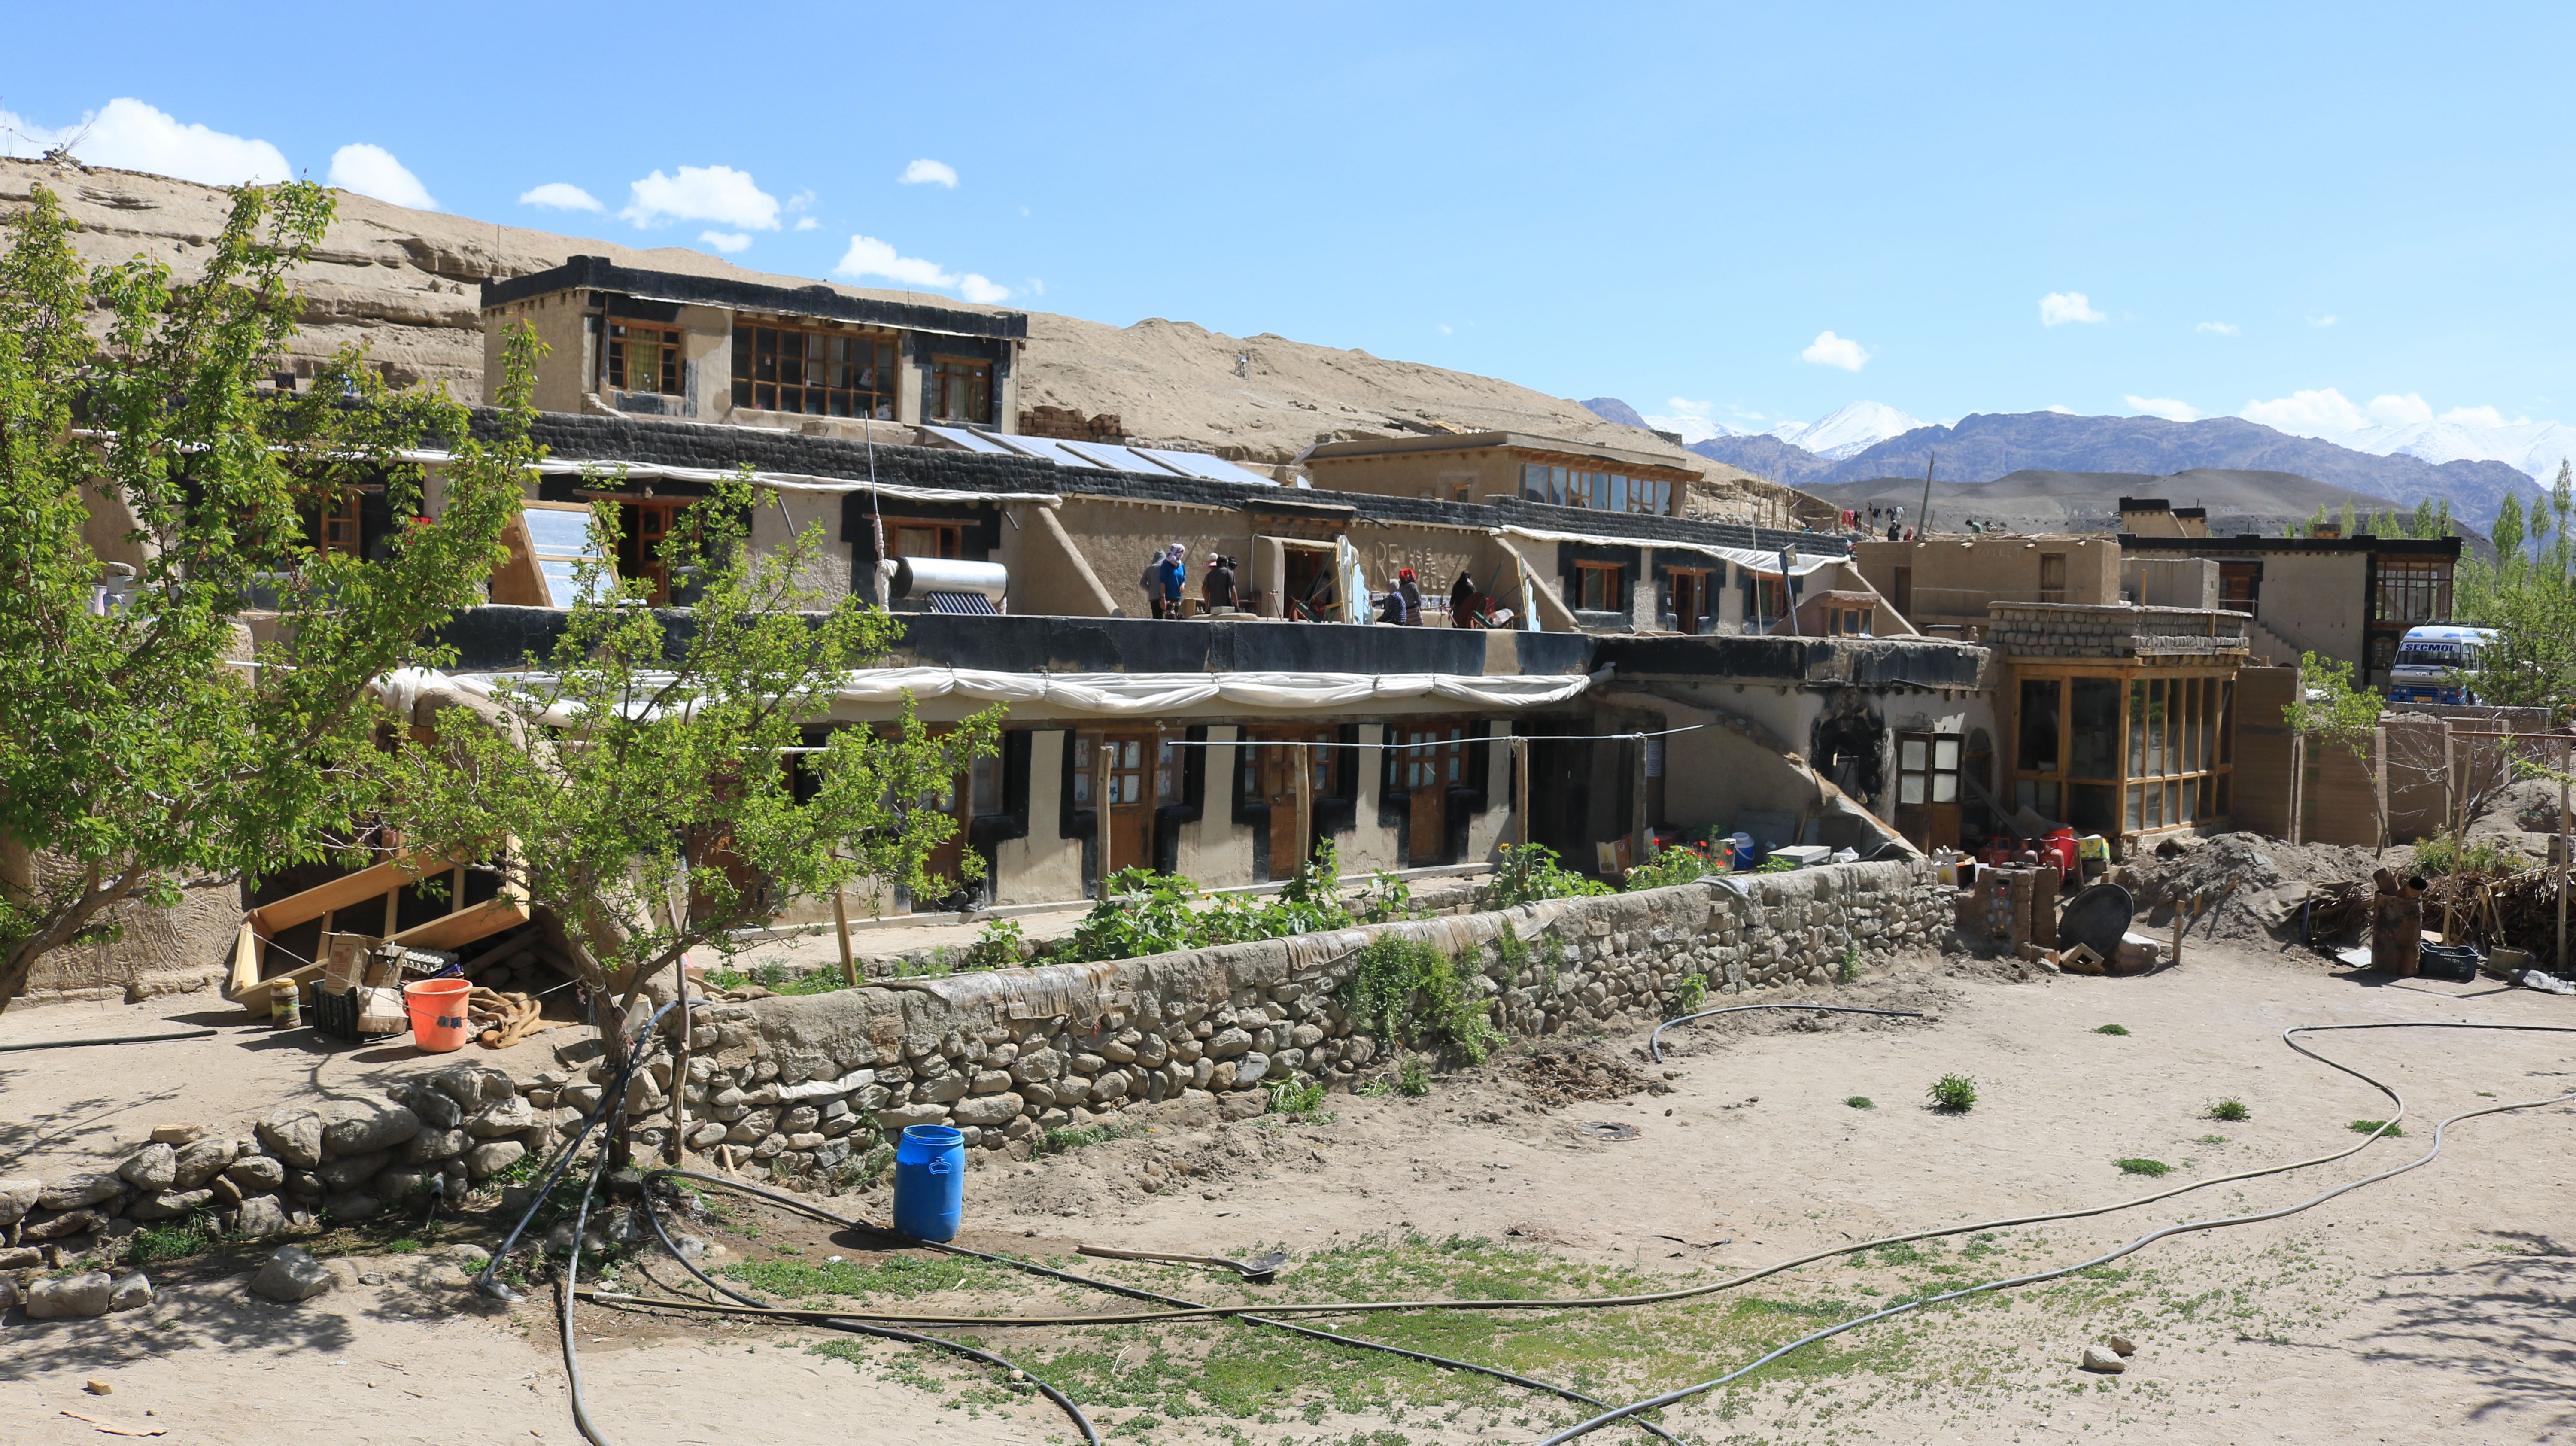 SECMOL campus has grown in Phey, an eco-village in Leh district, powered by solar technology. Image by Palak Barmaiya. India, 2017